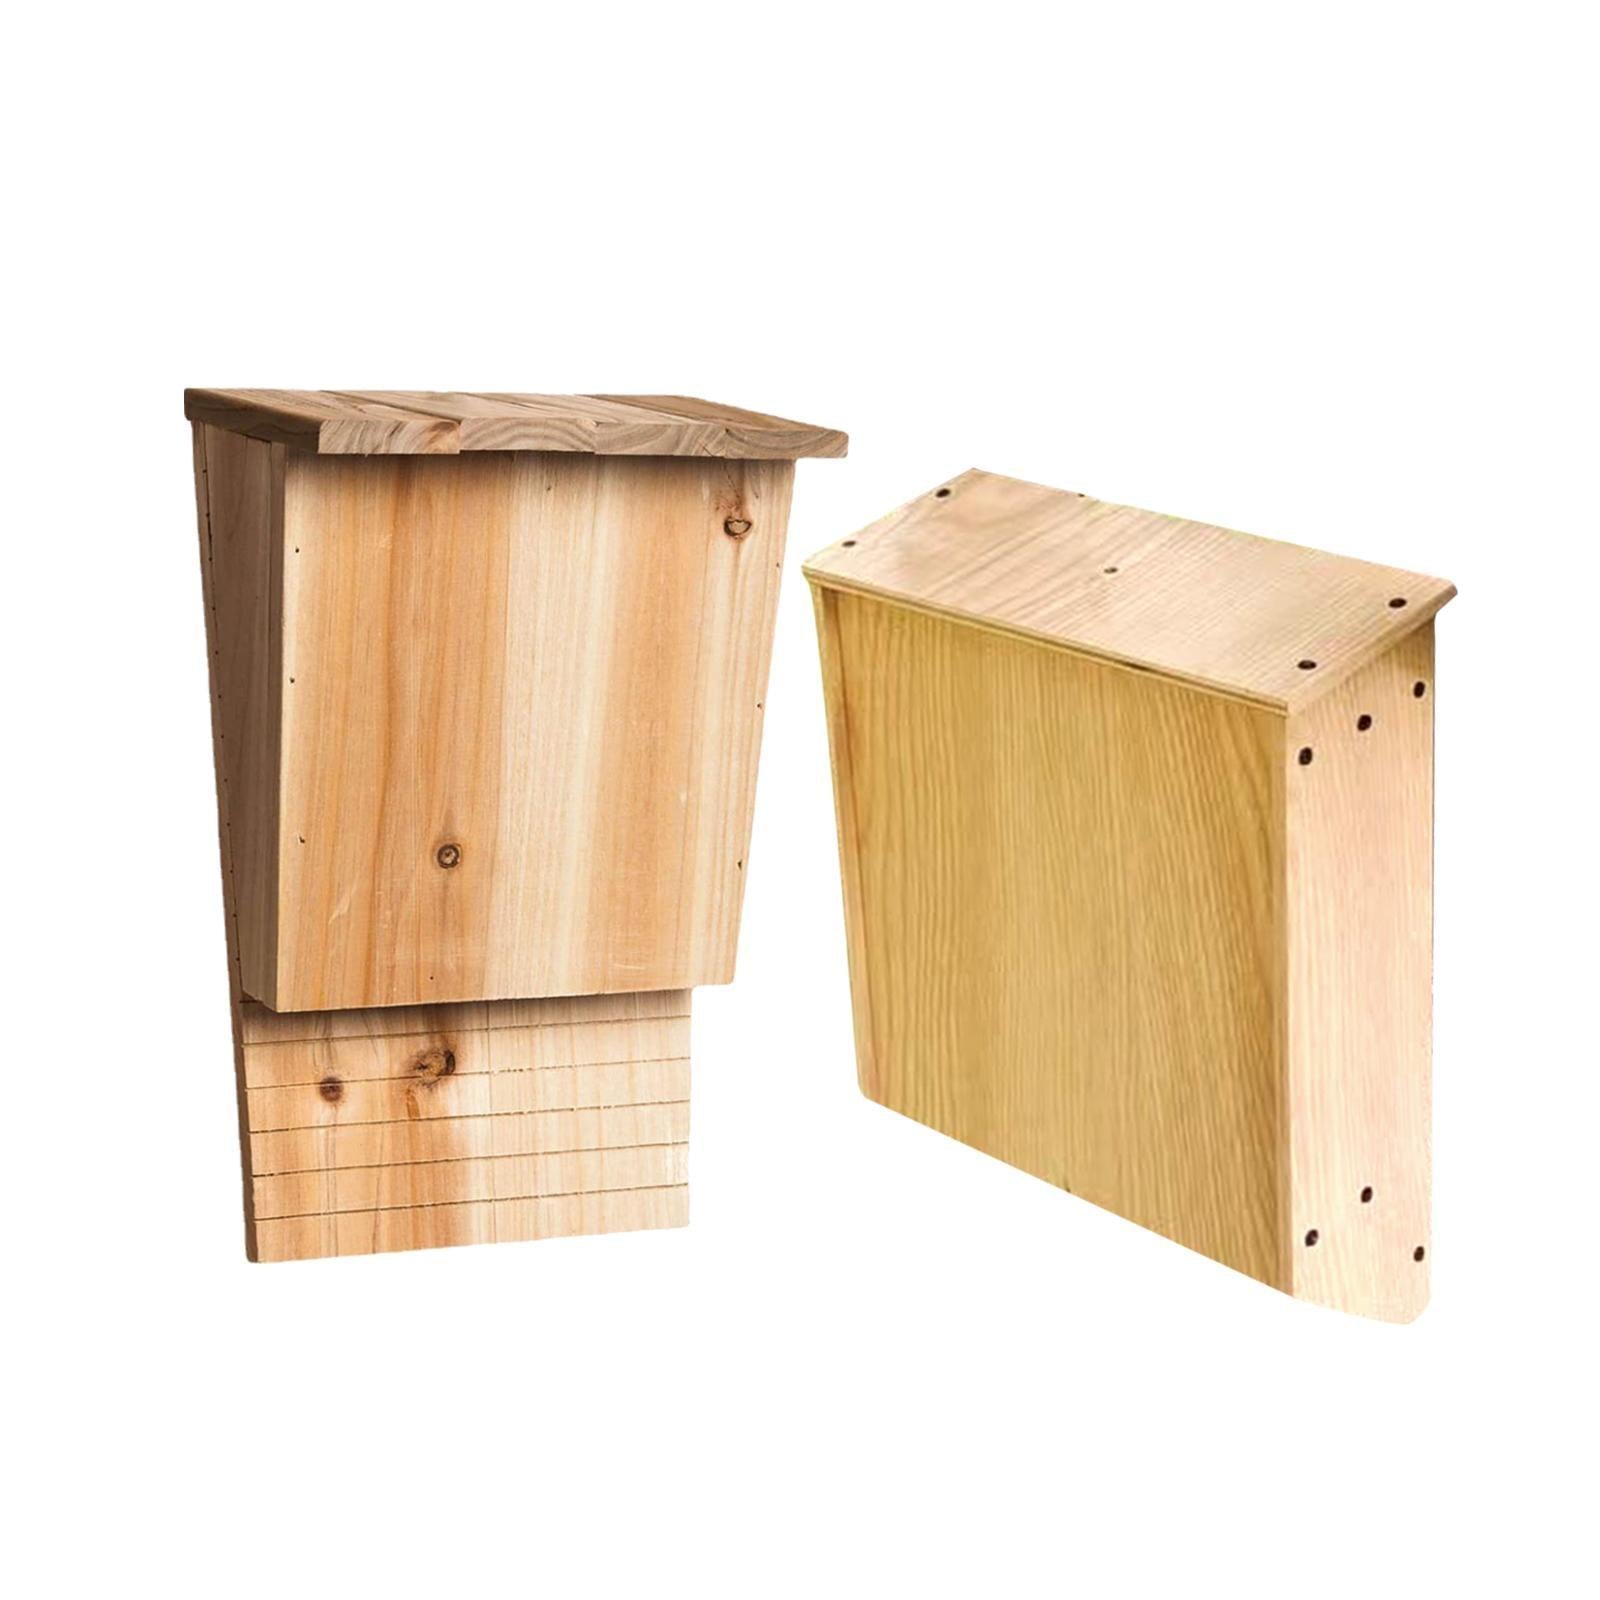 Large Weatherproof Wood Bat House Shelter - Easy to Install Outdoors - Earth Thanks - Large Weatherproof Wood Bat House Shelter - Easy to Install Outdoors - natural, vegan, eco-friendly, organic, sustainable, bat house, beneficial, biodegradable, box, conservation, cozy, durable, easy to install, garden, home, large, natural, nature, non-toxic, outdoor, plant, plant-based, plastic-free, roost, safe, seeds, shelter, vegan, weatherproof, wood, wooden